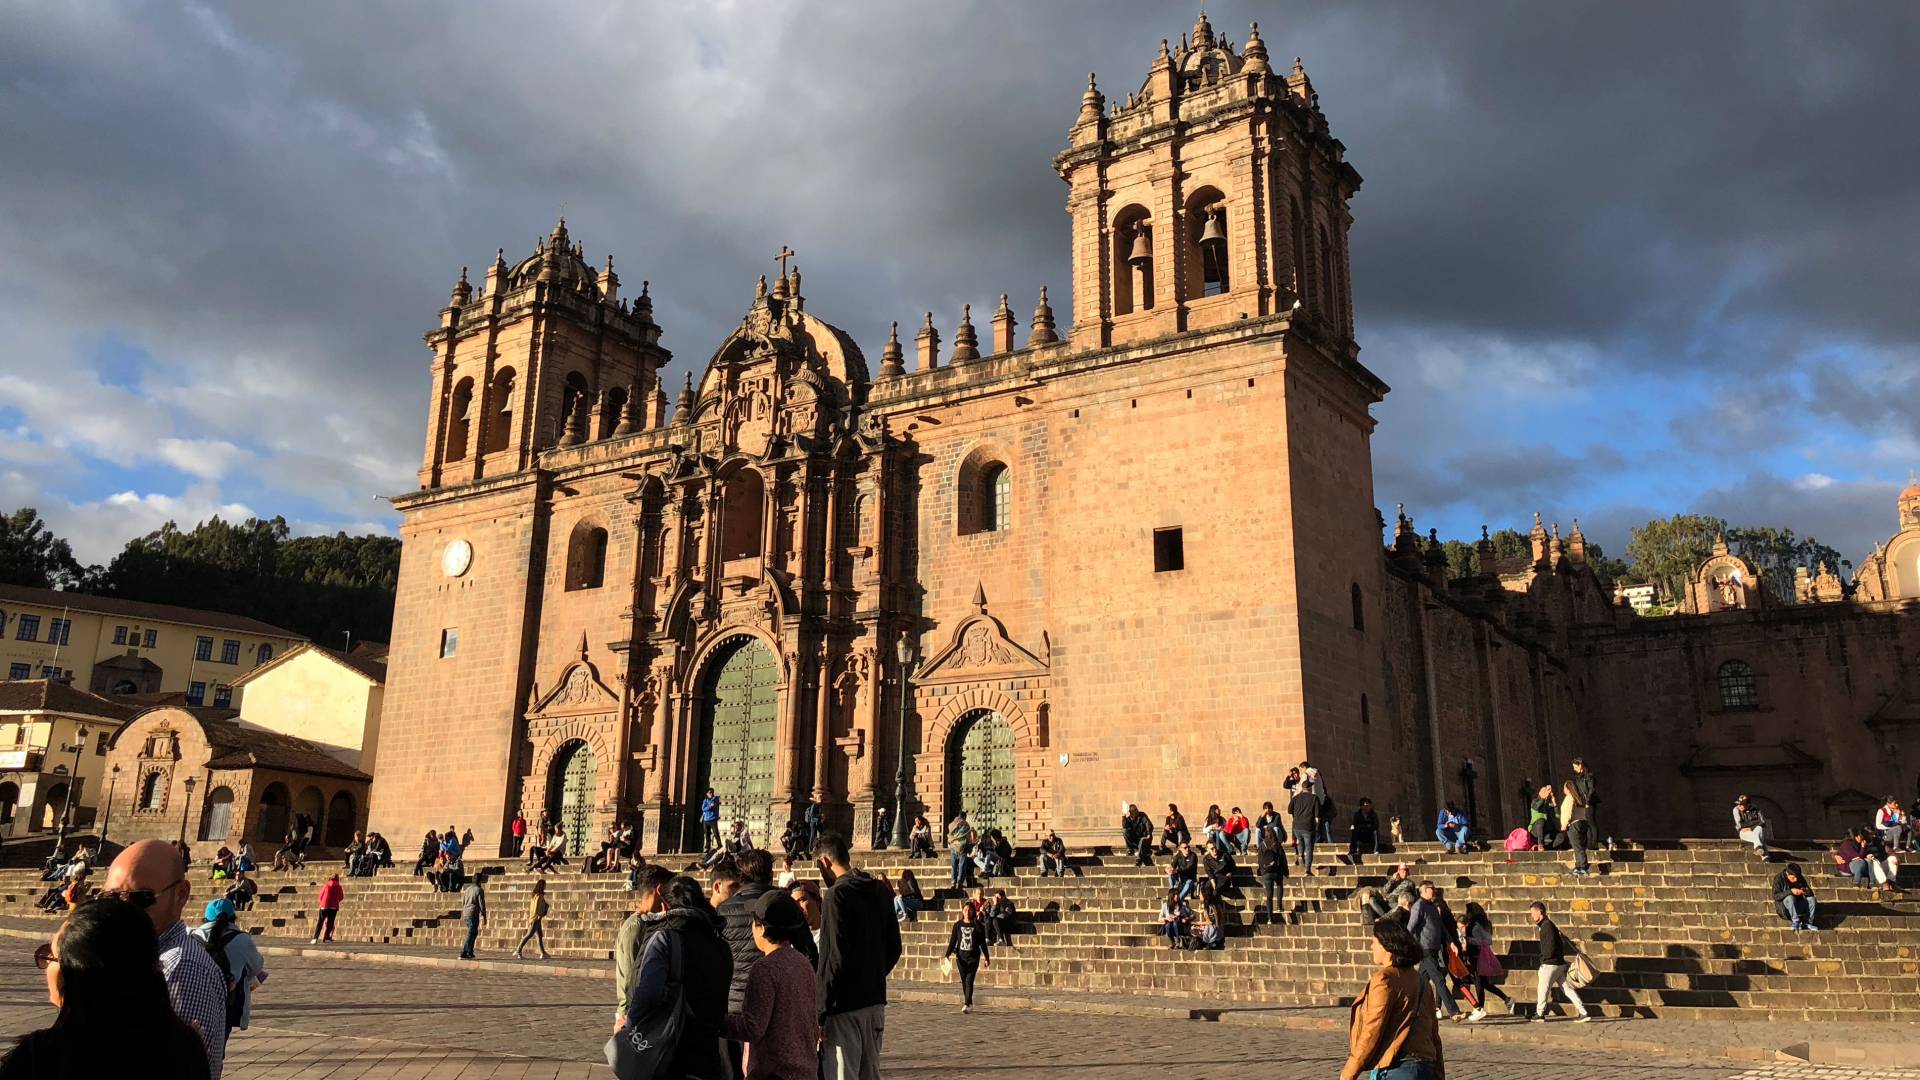 Cathedral Basilica of Our Lady of the Assumption in Cusco